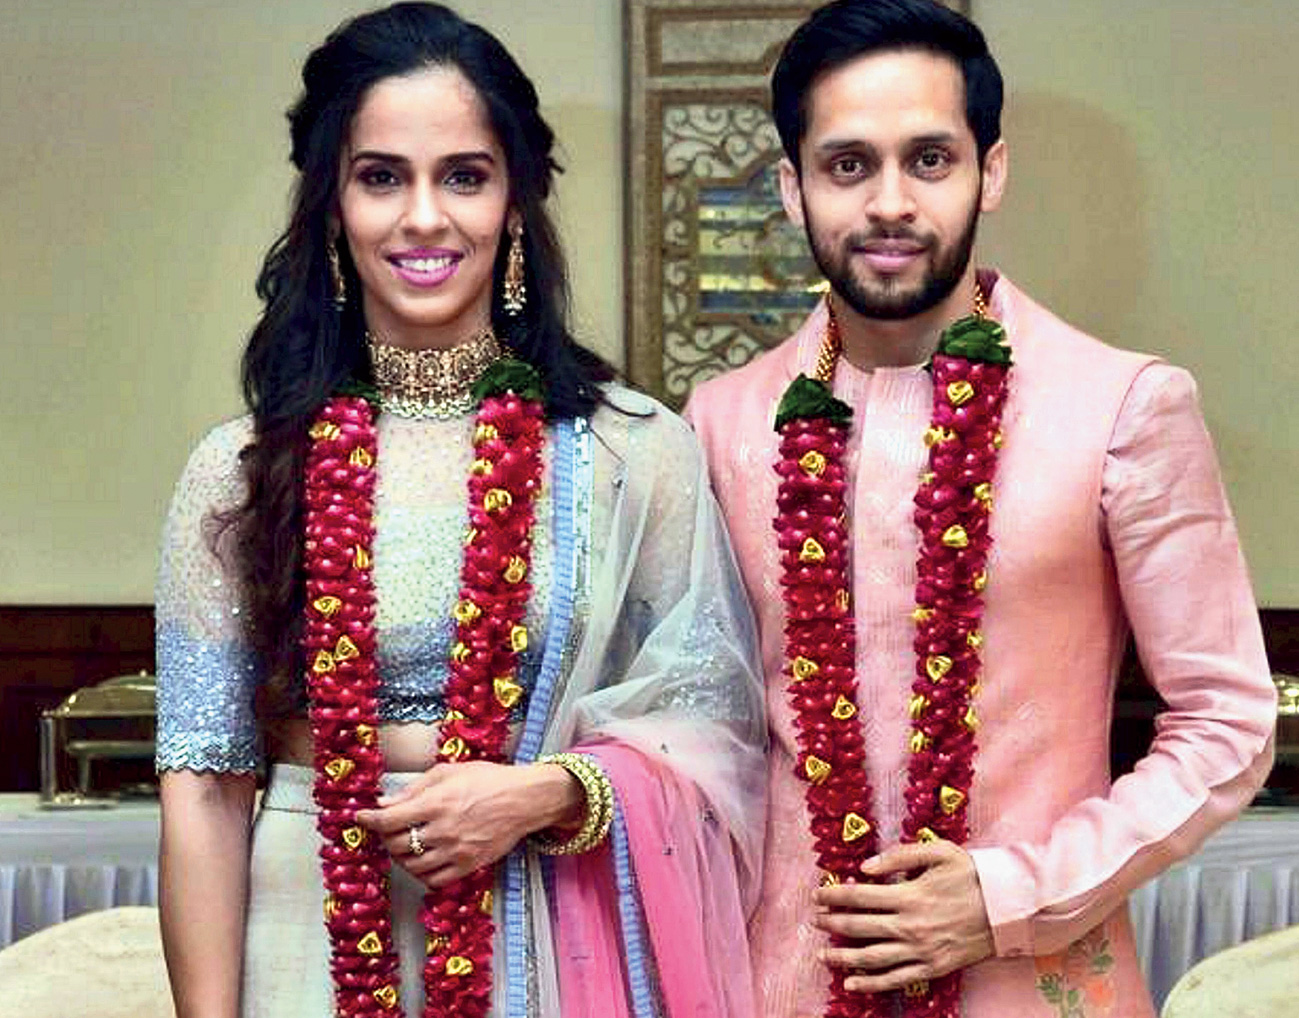 Just married: Saina Nehwal and Parupalli Kashyap after their wedding in Hyderabad on Friday. 